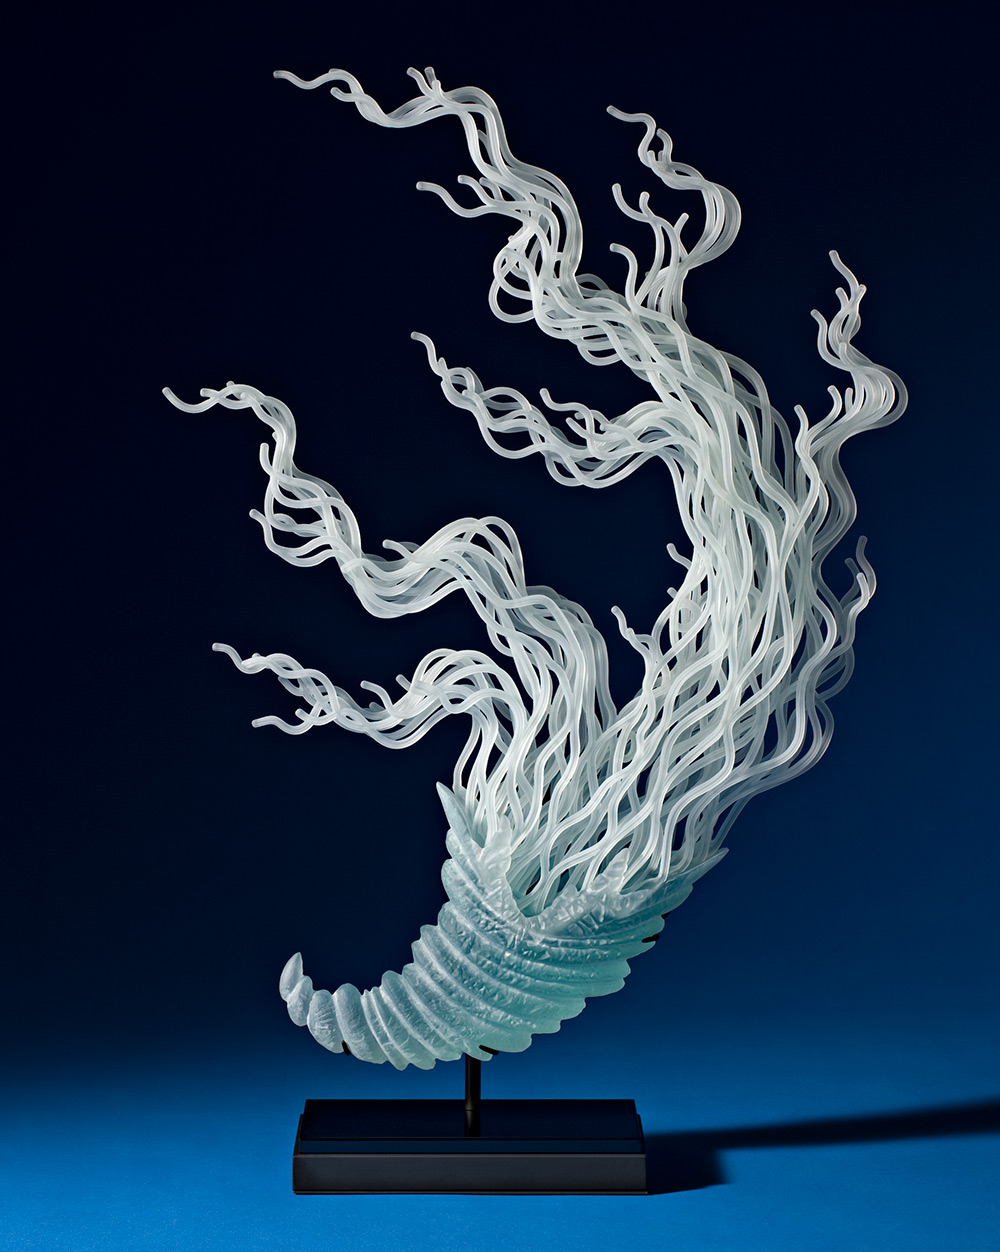 Sublime Glass Sculptures Inspired By Waves And Sea Creatures By K. William Lequier (6)